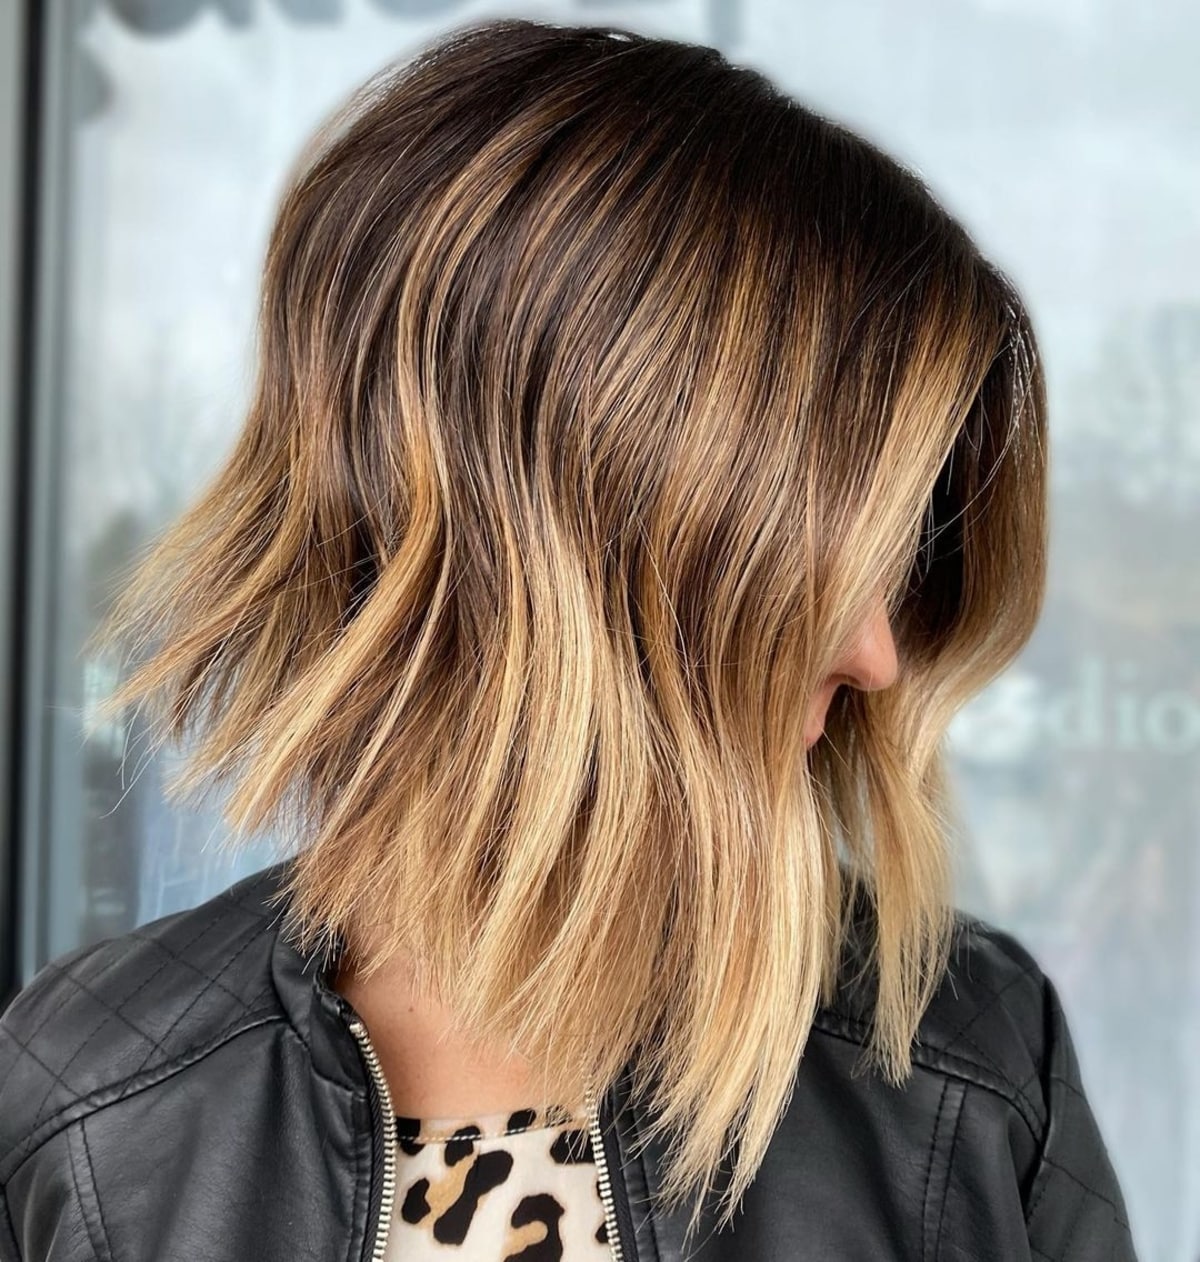 Short hair with wispy layers